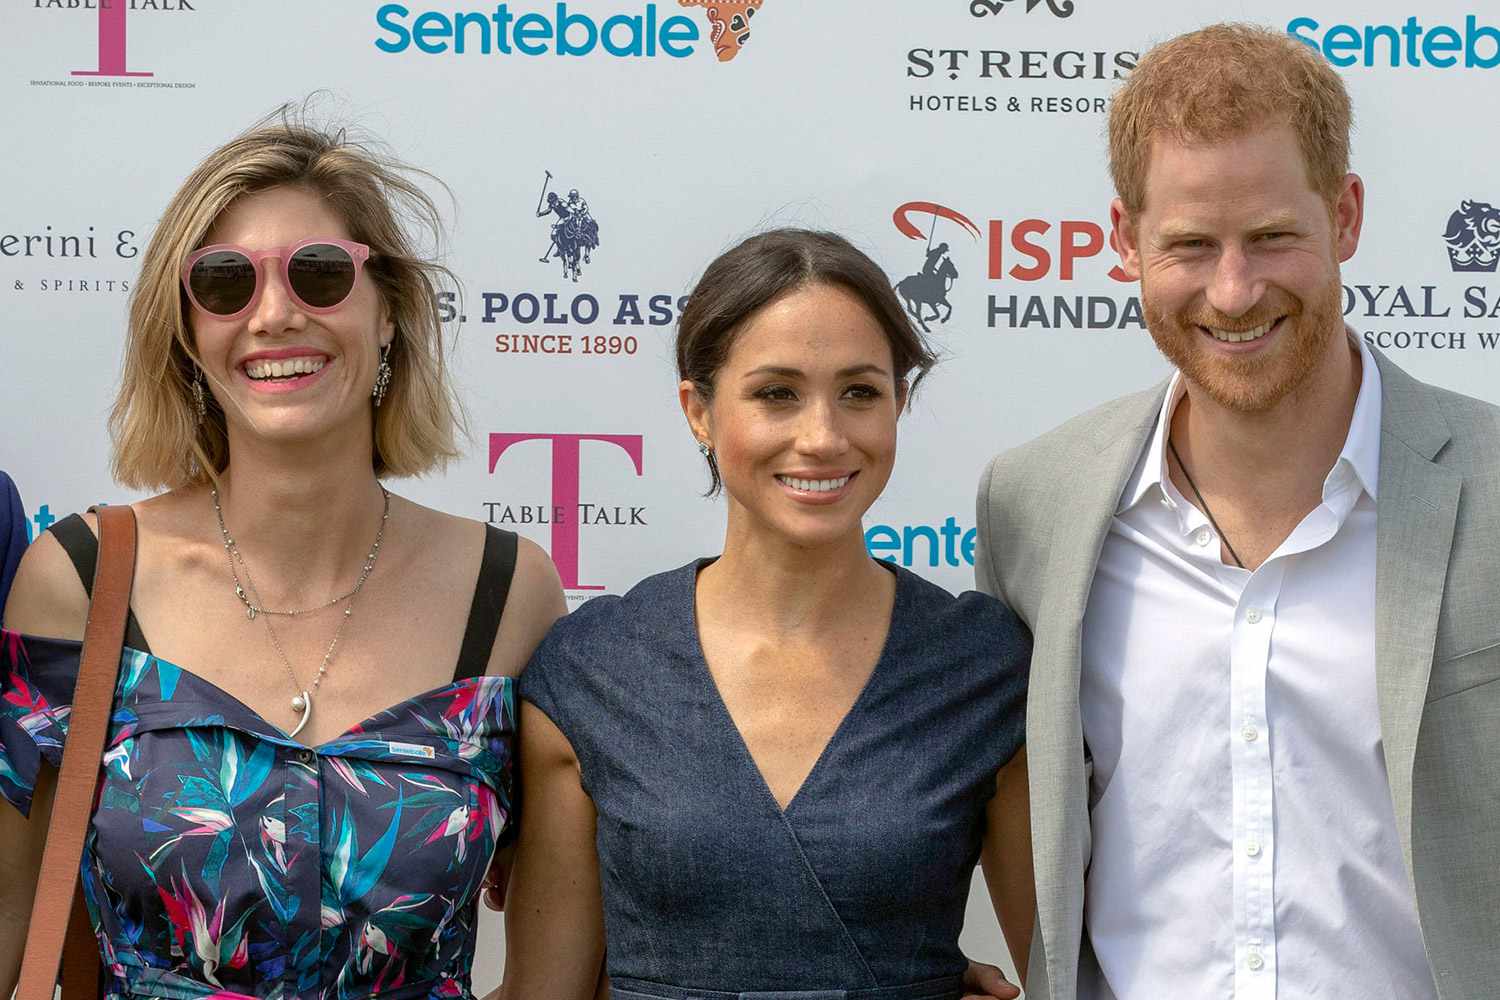 Delfina Balquier (left) with the Duke and Duchess of Sussex as they arrive for the Sentebale ISPS Handa Polo Cup at the Royal County of Berkshire Polo Club in Windsor. (Photo by Steve Parsons/PA Images via Getty Images)